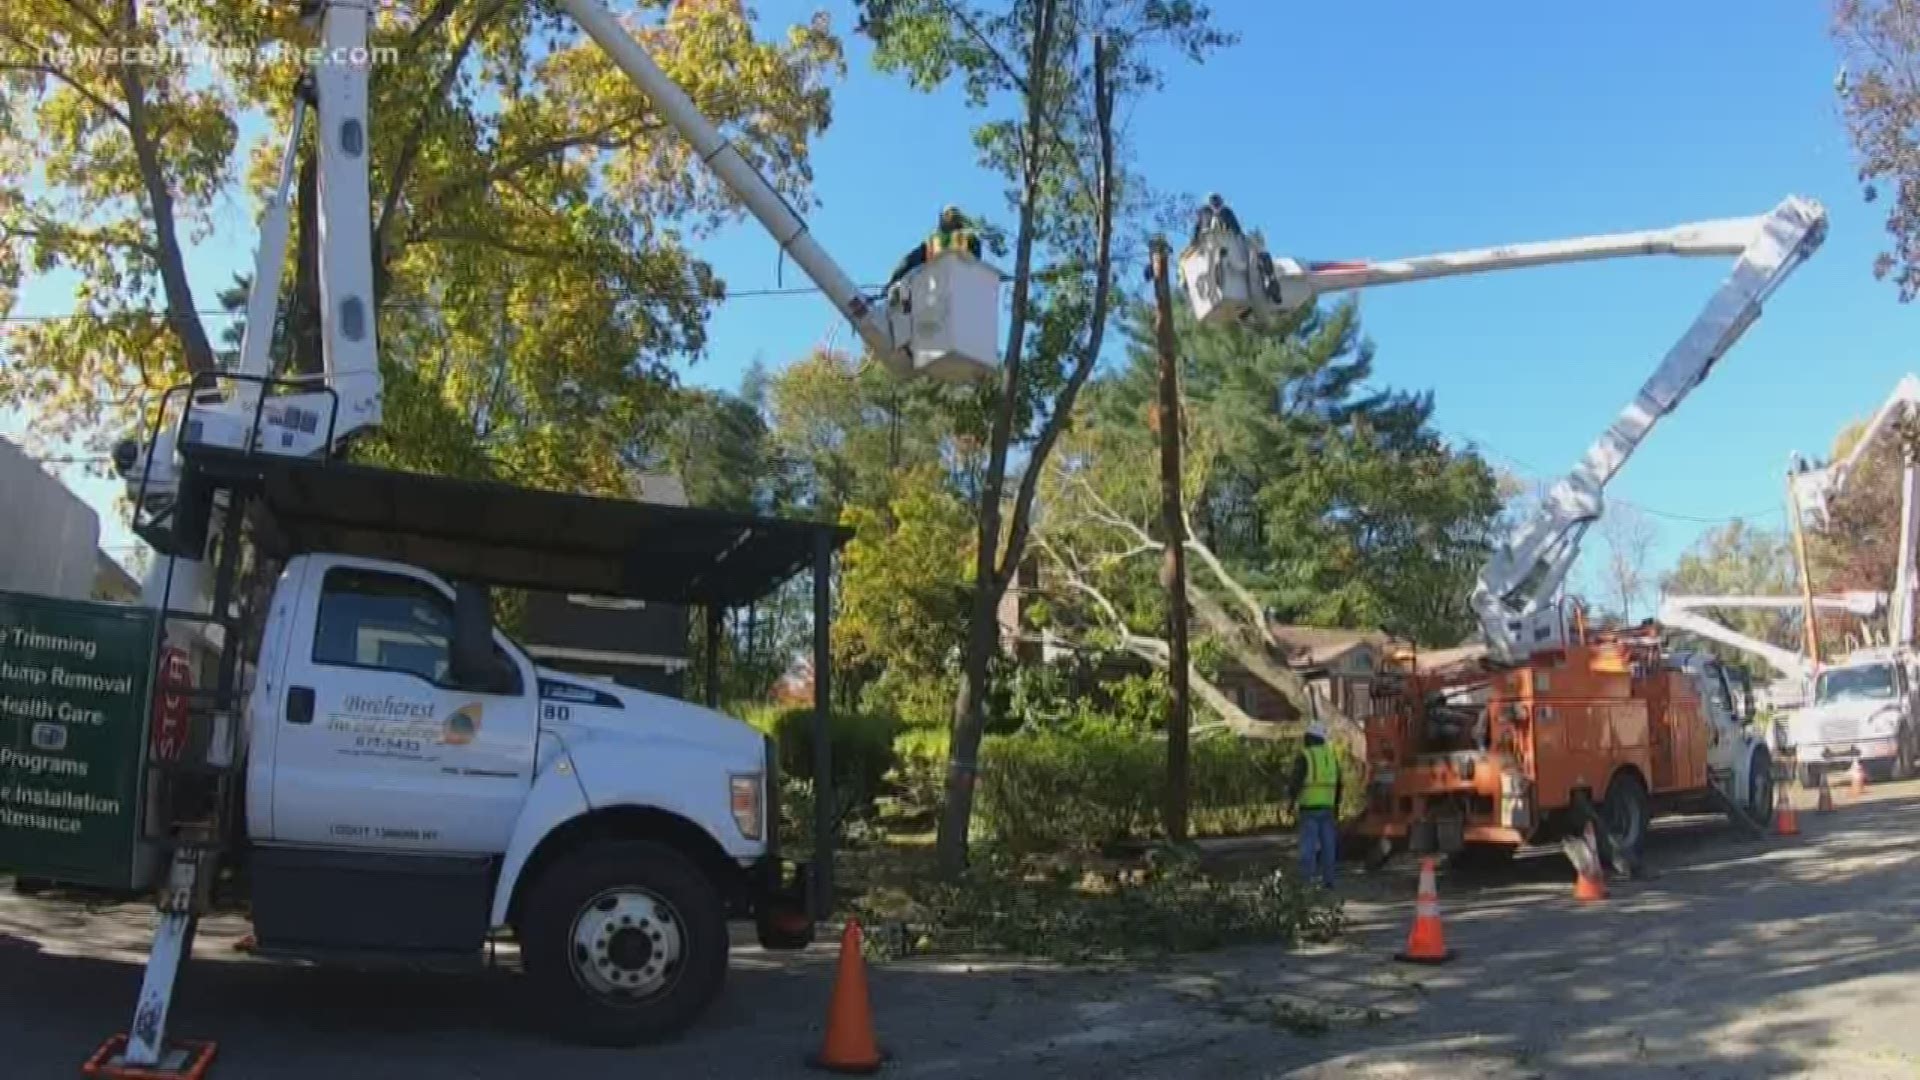 Power is being restored to customers across the state as Central Maine Power works to clean up the wreckage from Thursday's storm.